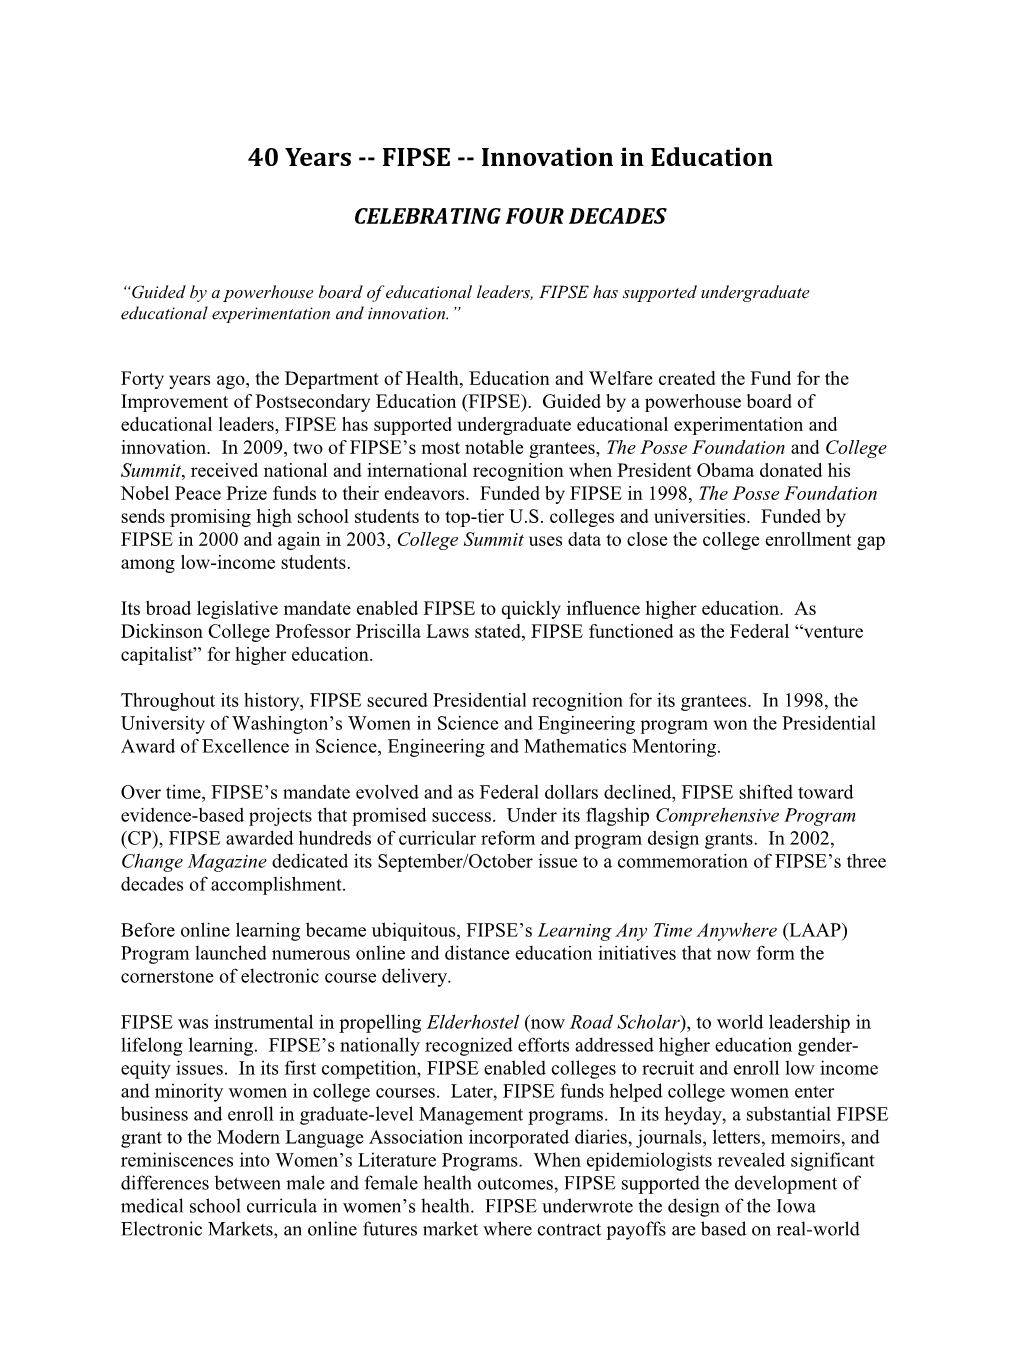 FIPSE 40Th Anniversary Announcement (MS Word)